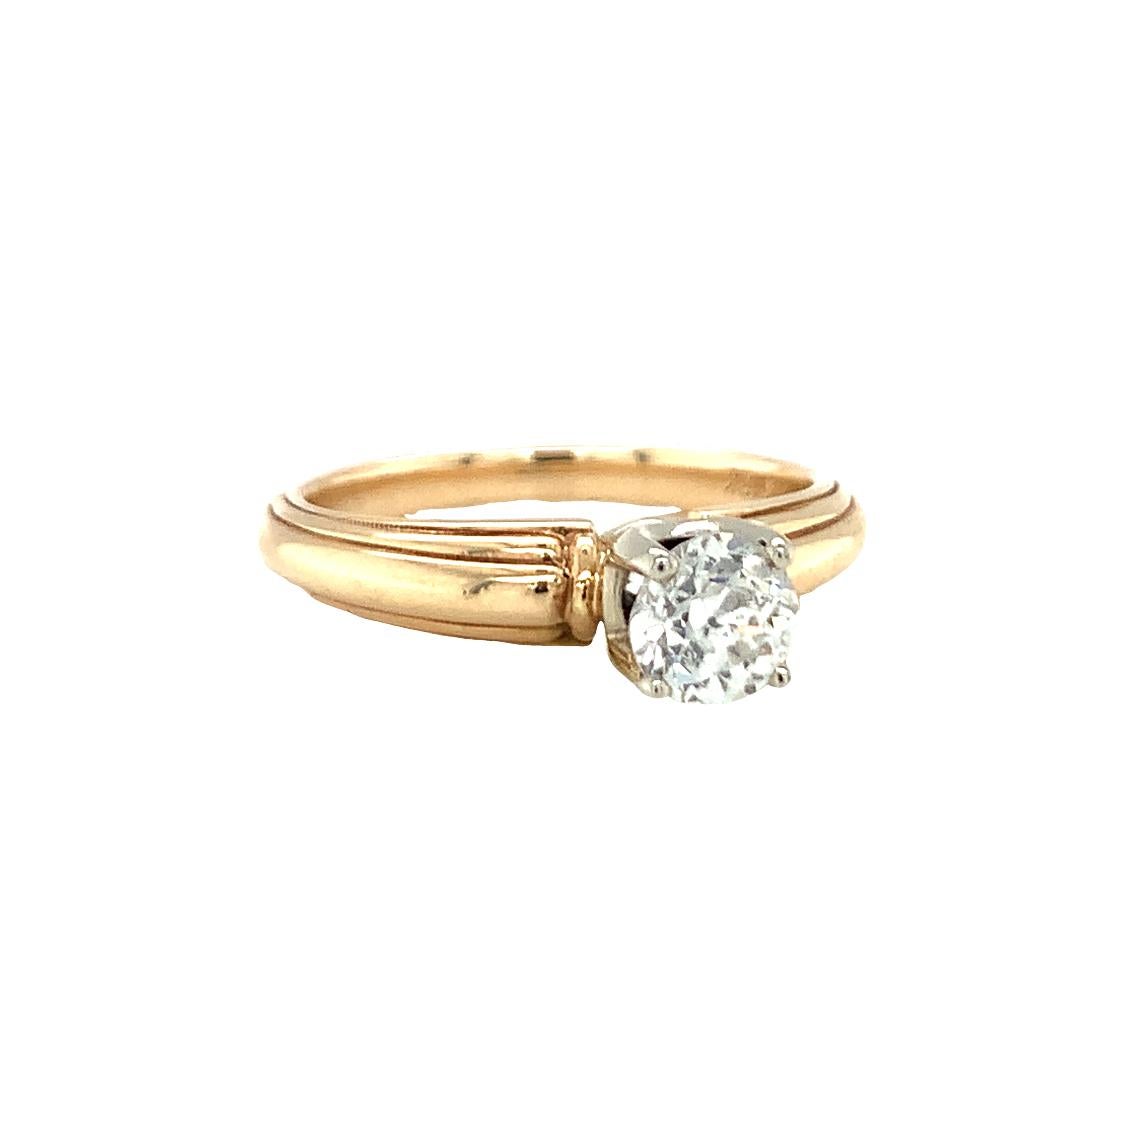 One Retro diamond engagement 18K and 14K yellow gold ring centering one prong set, old European cut diamond weighing 0.55 ct. (exact weight) with an H-I color and SI-2 clarity. The ring features a fluted design on the shoulders and a high polish